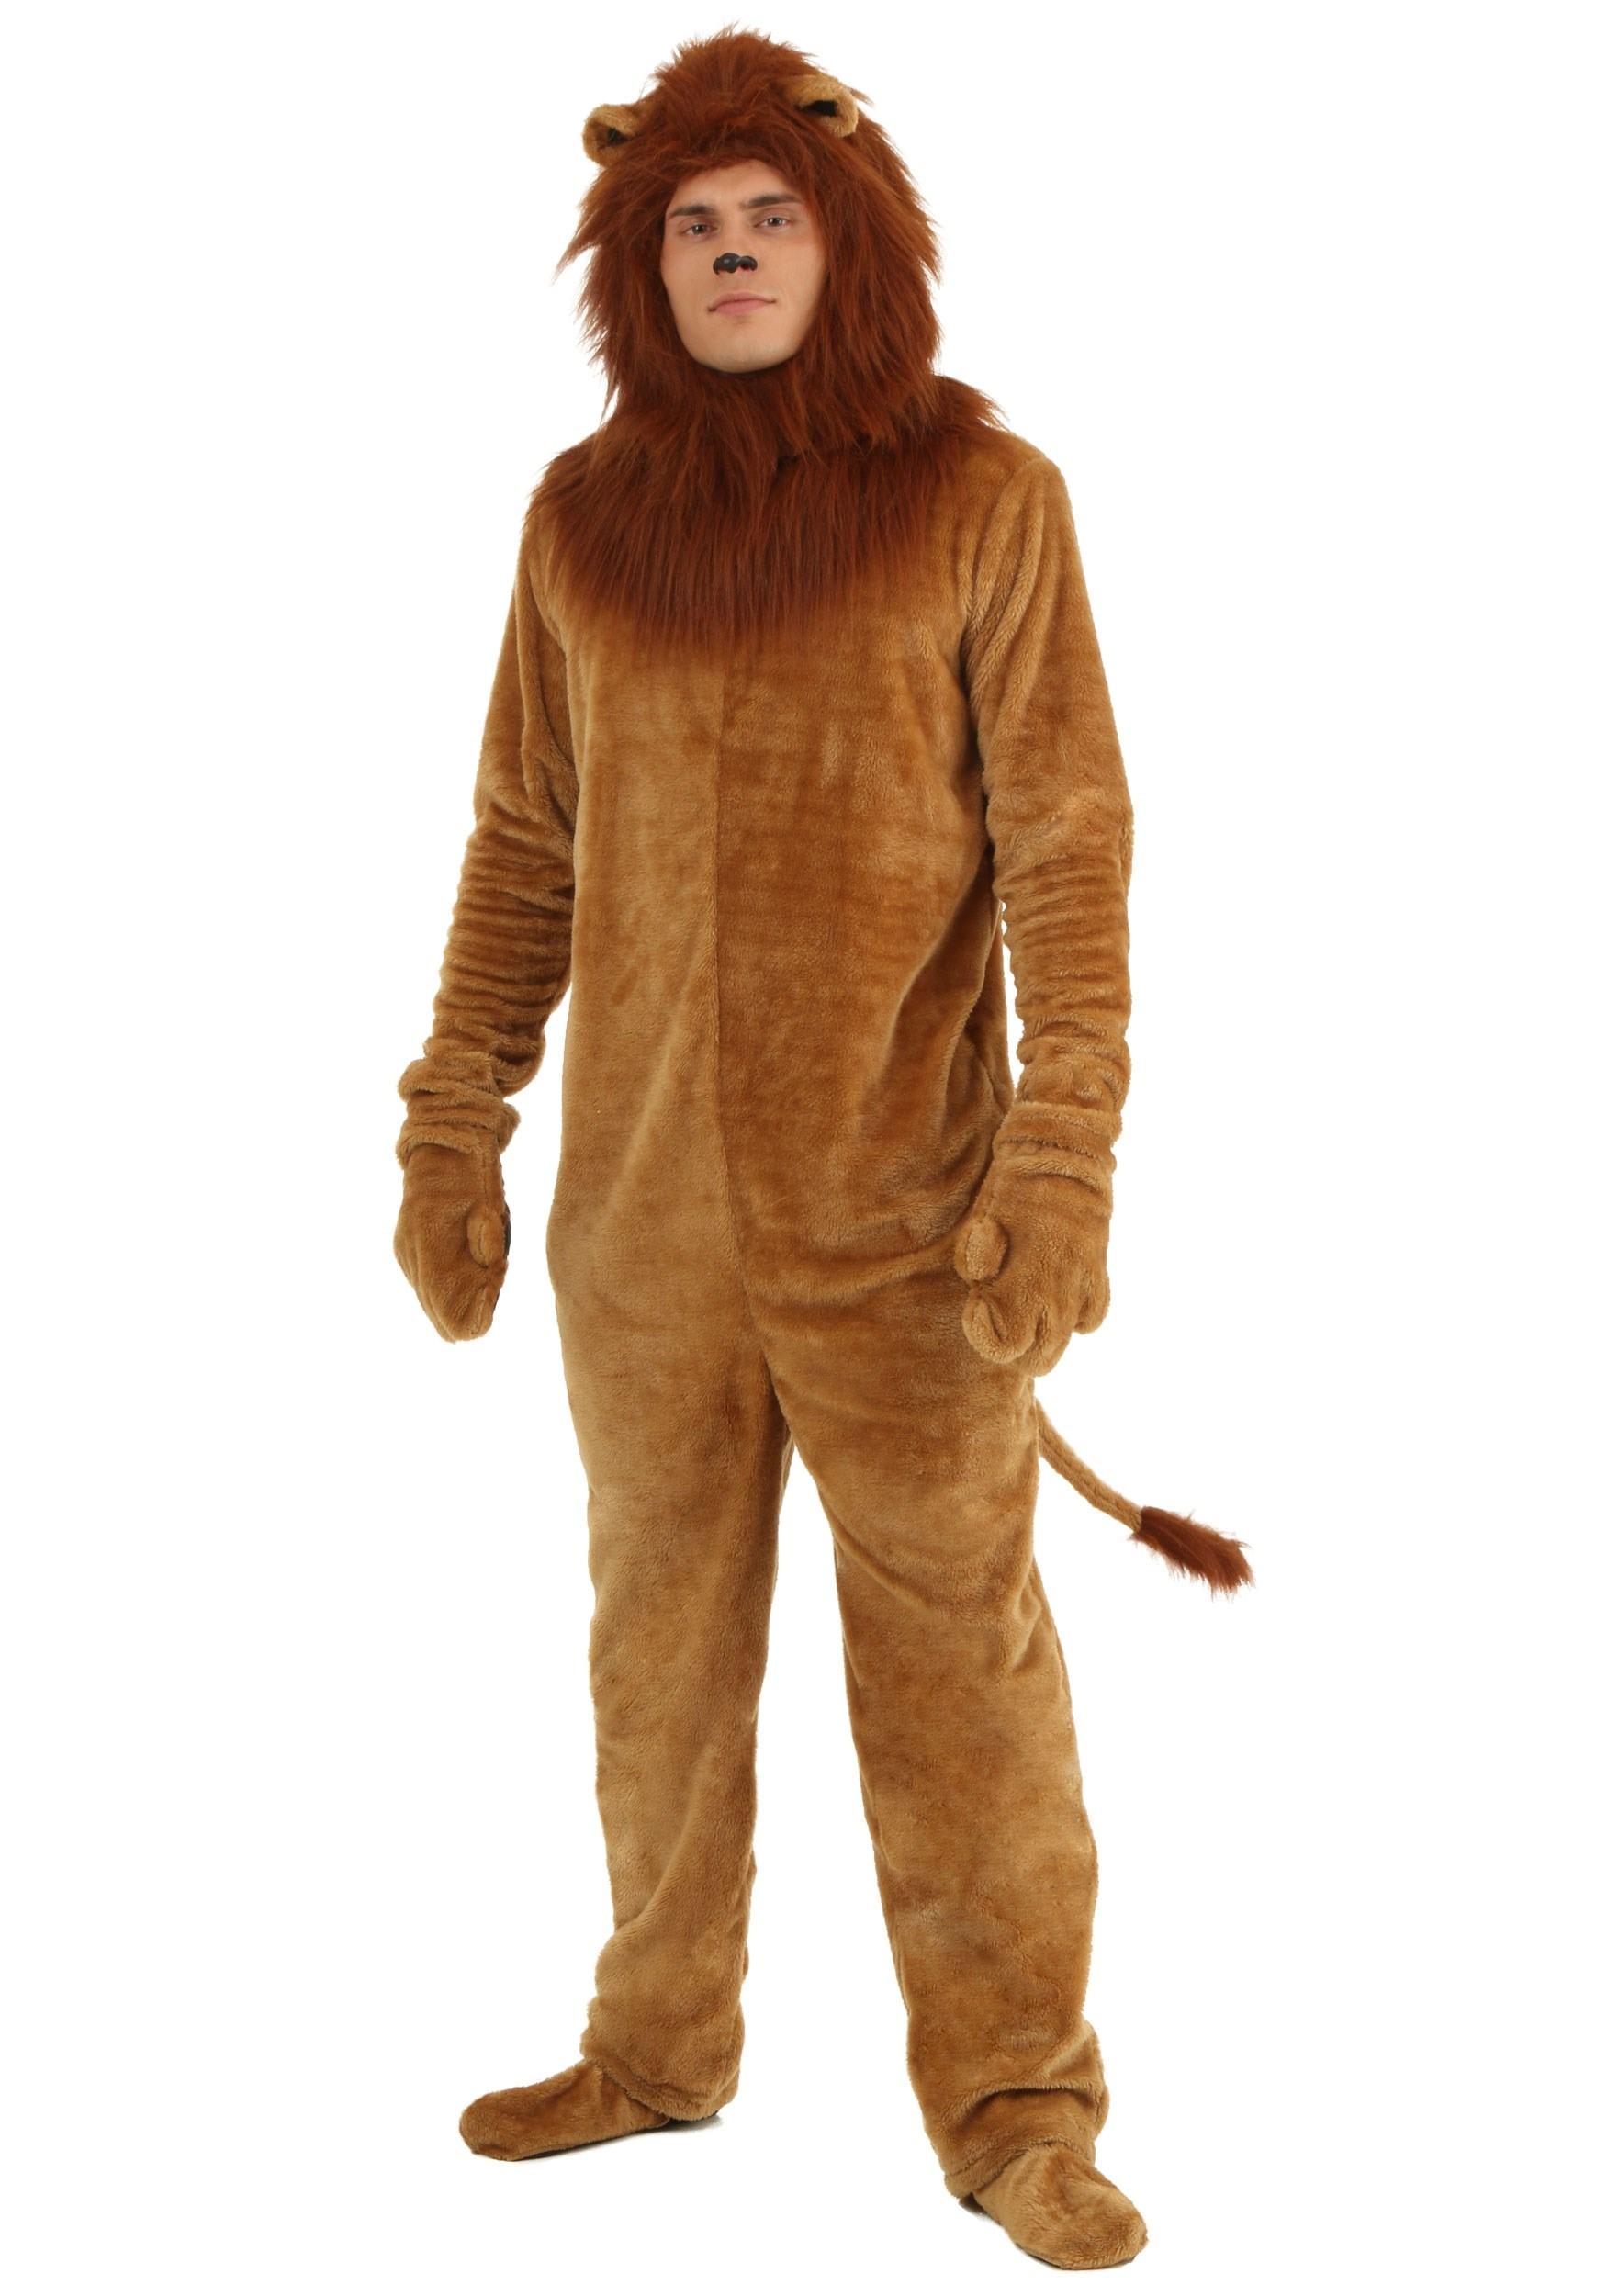 DIY Lion Costume For Adults
 Adult Deluxe Lion Costume